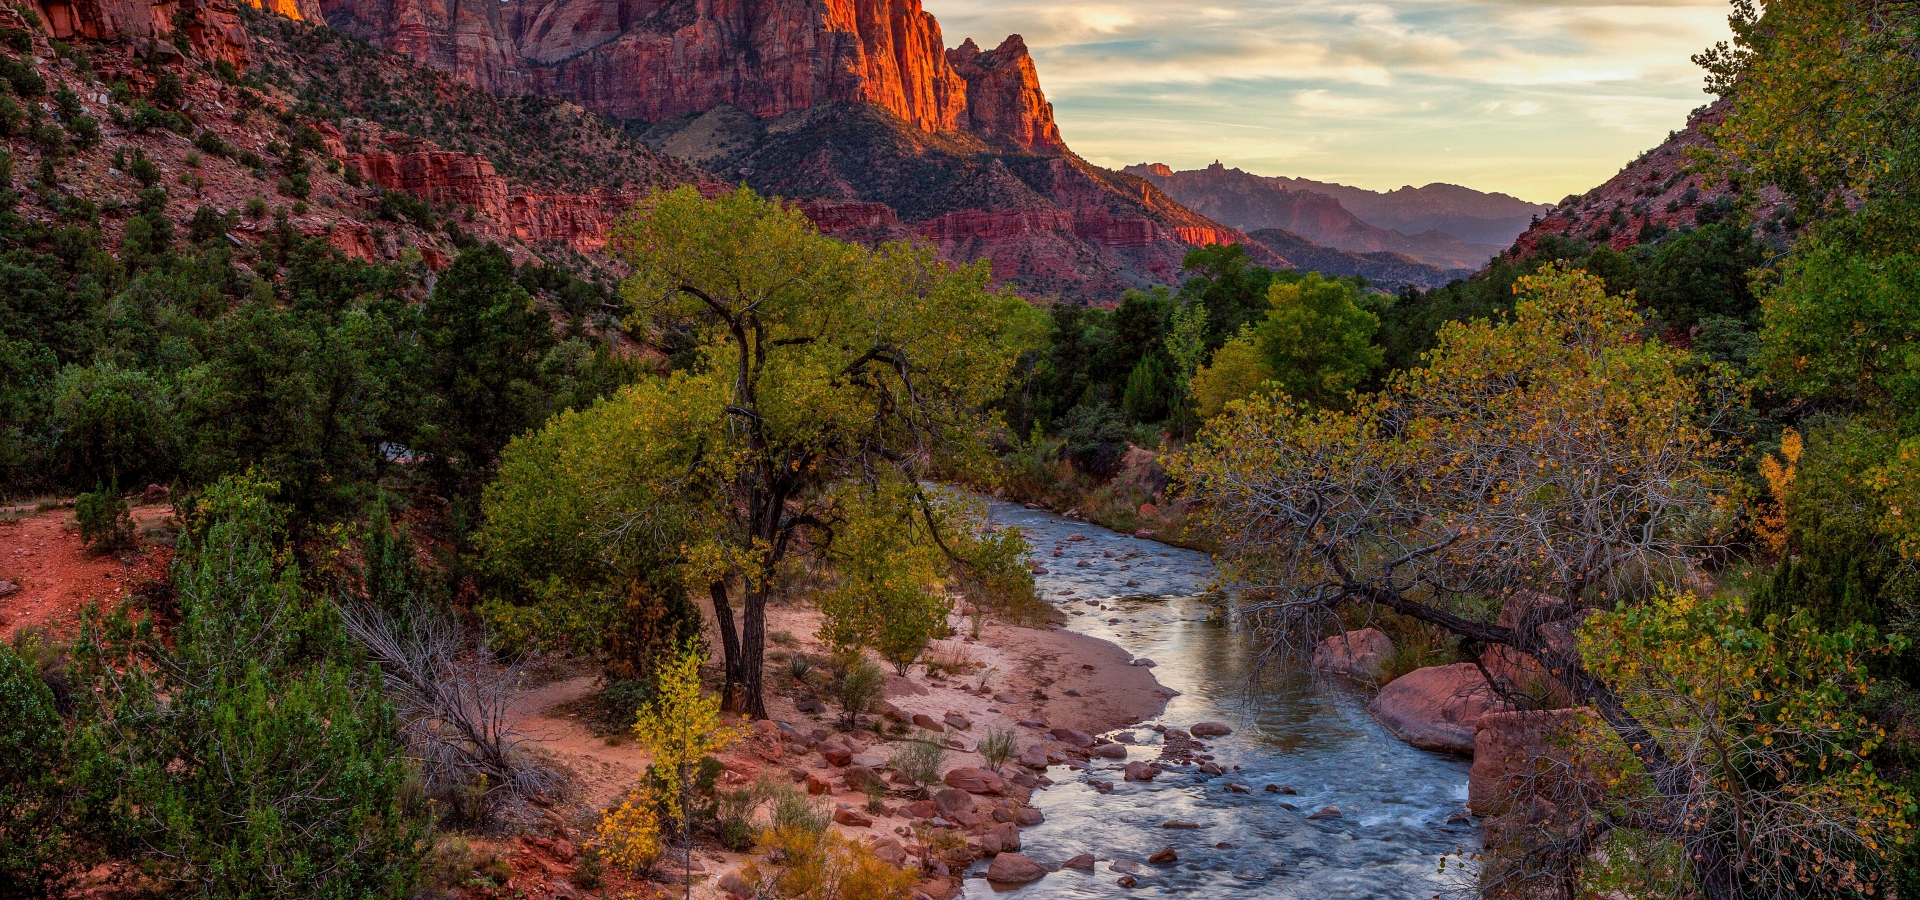 river flowing through zion national park in utah